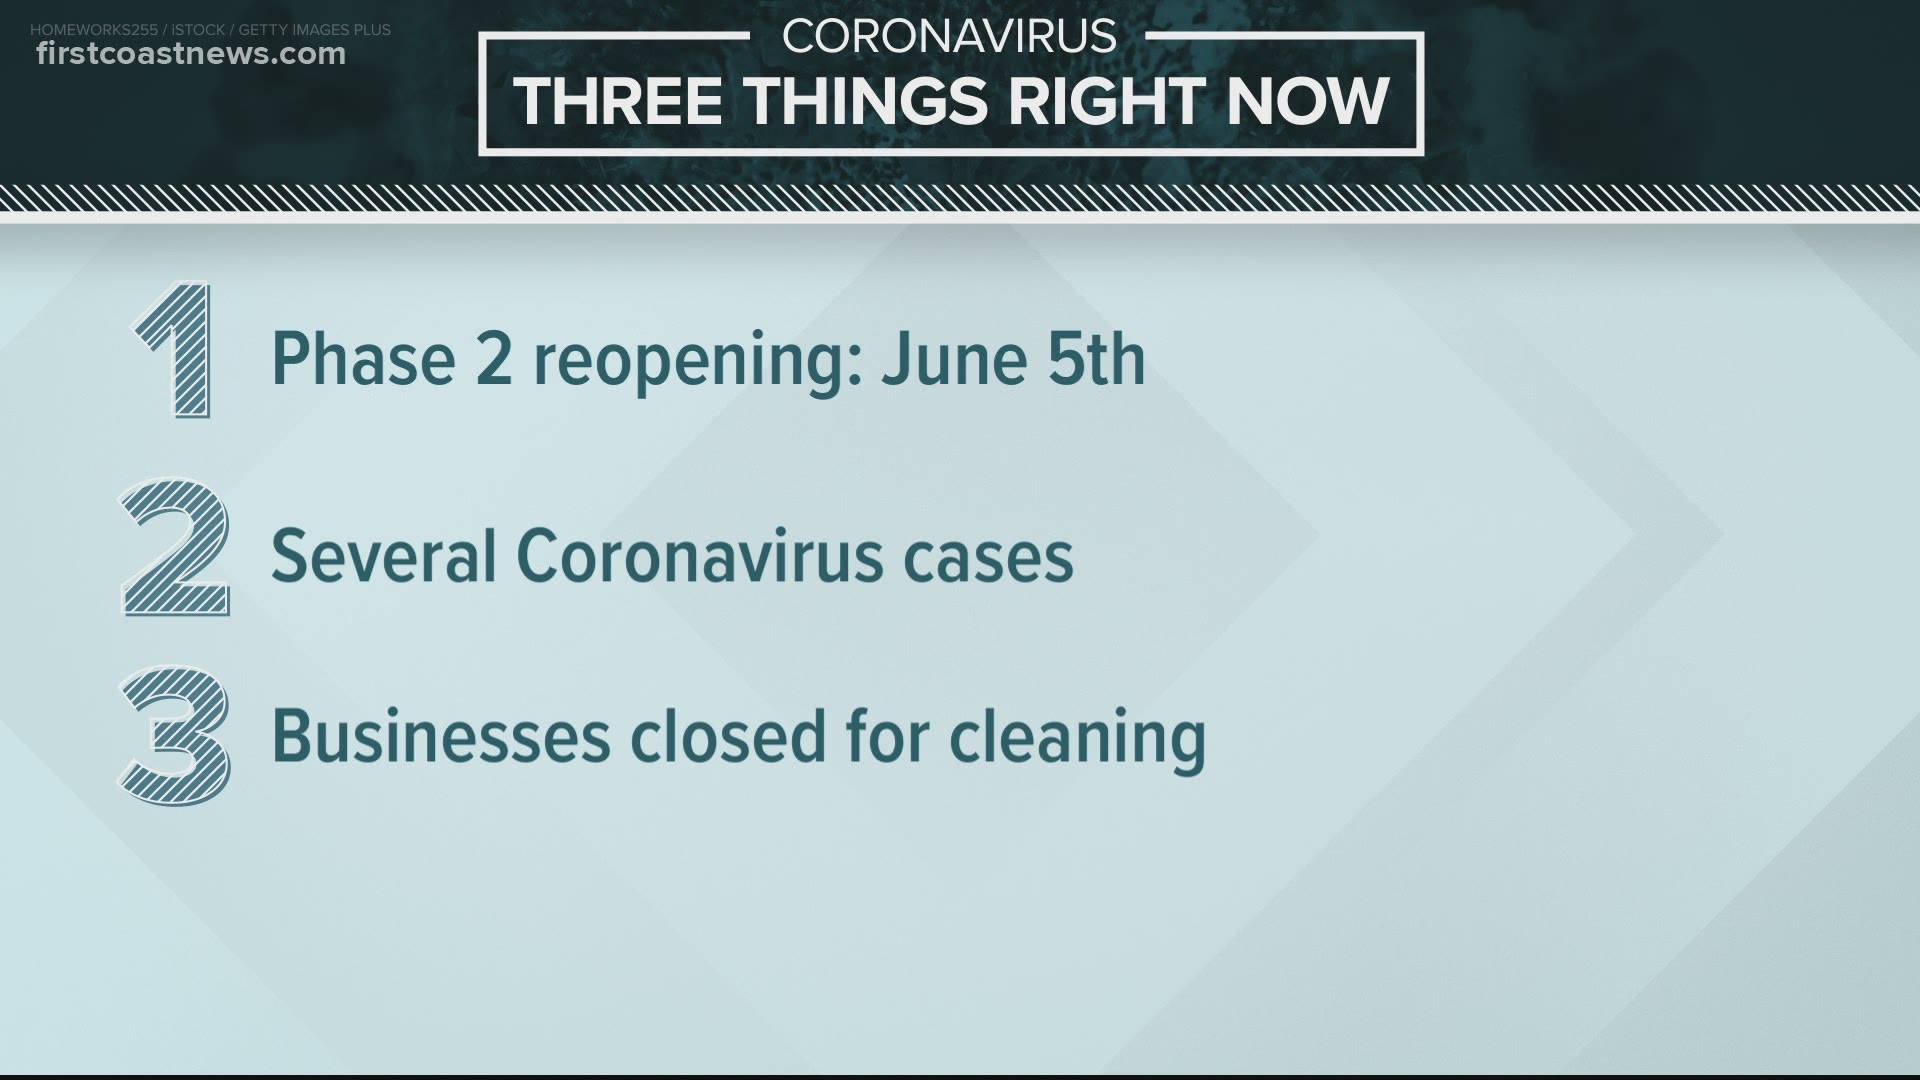 Many beach-area bars and restaurants are closing for deep cleaning and having employees tested for COVID-19 after several positive diagnoses.